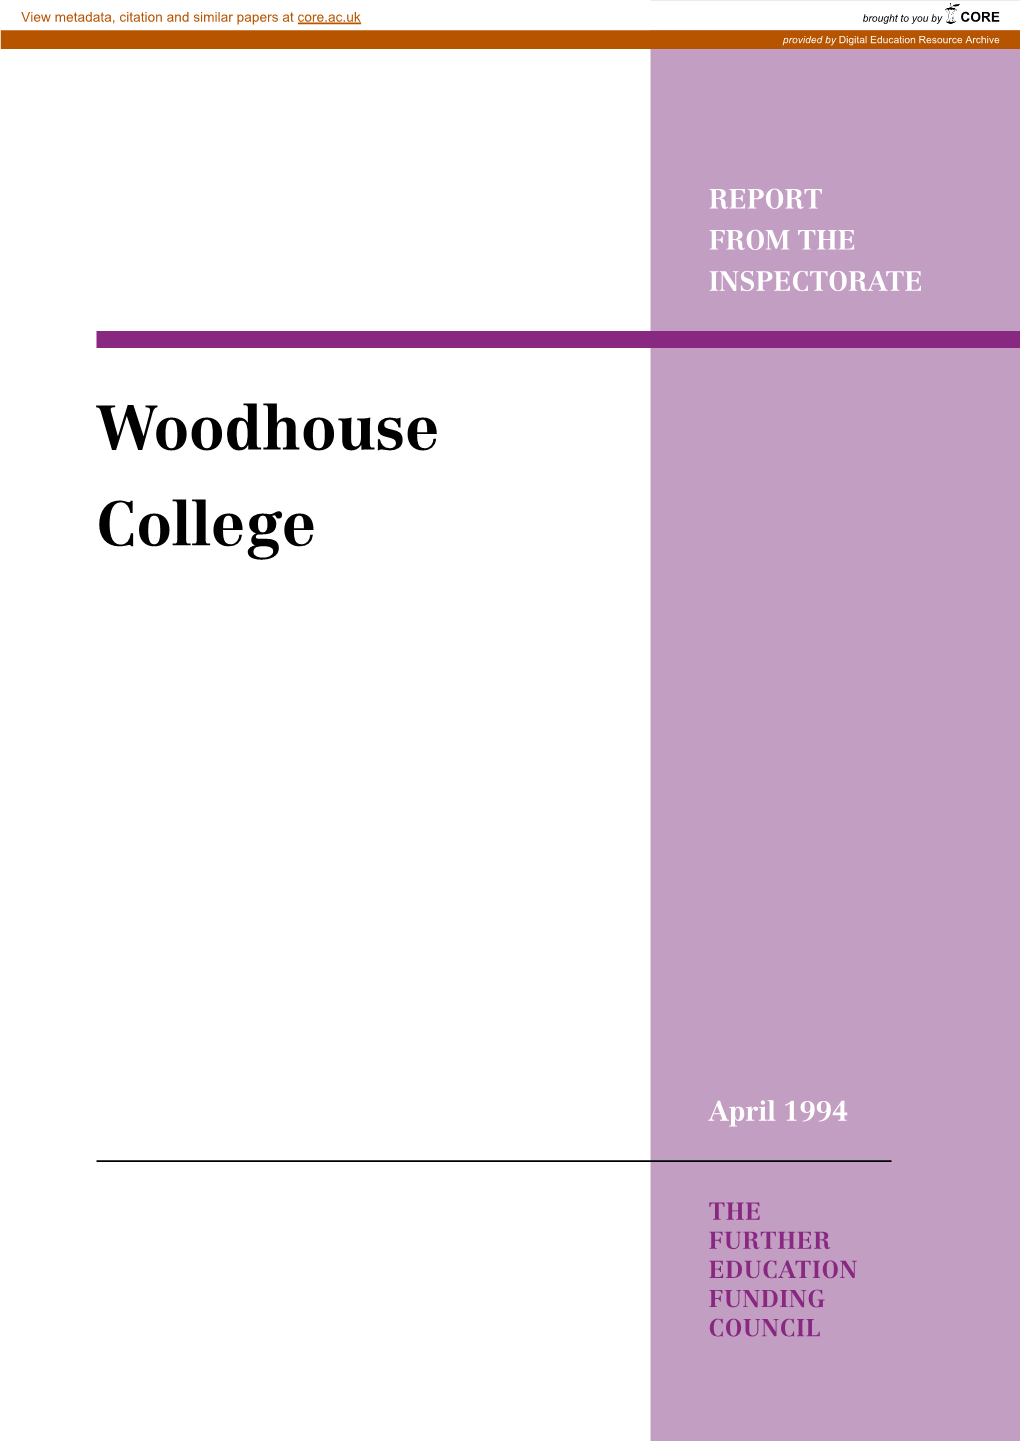 Woodhouse College